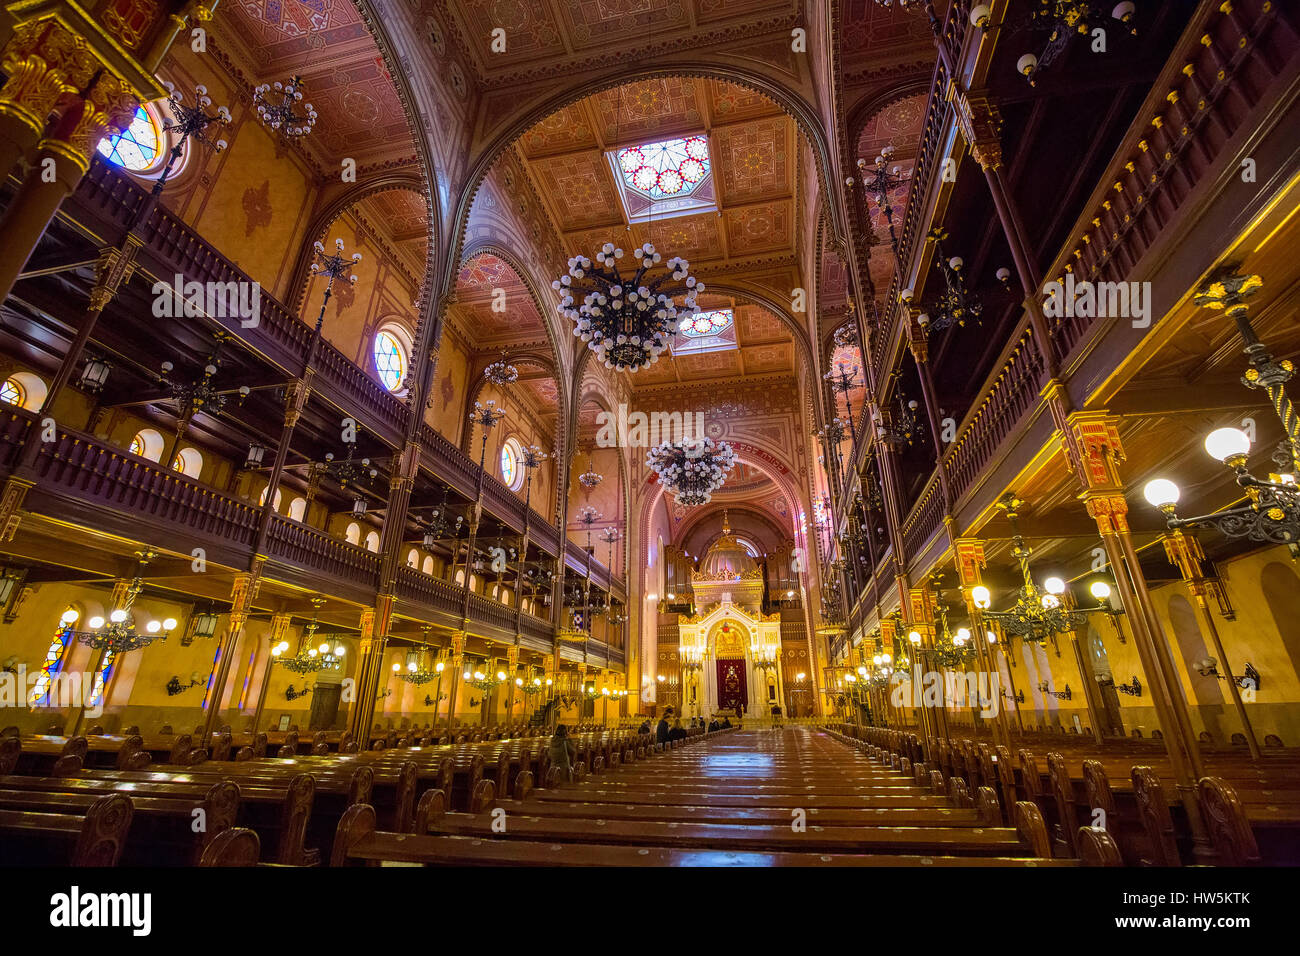 Interior of the Dohány Street or Great Jewish Synagogue nagy zsinagóga. The Second largest Synagogue in the world built in Moorish Revival Style. Buda Stock Photo